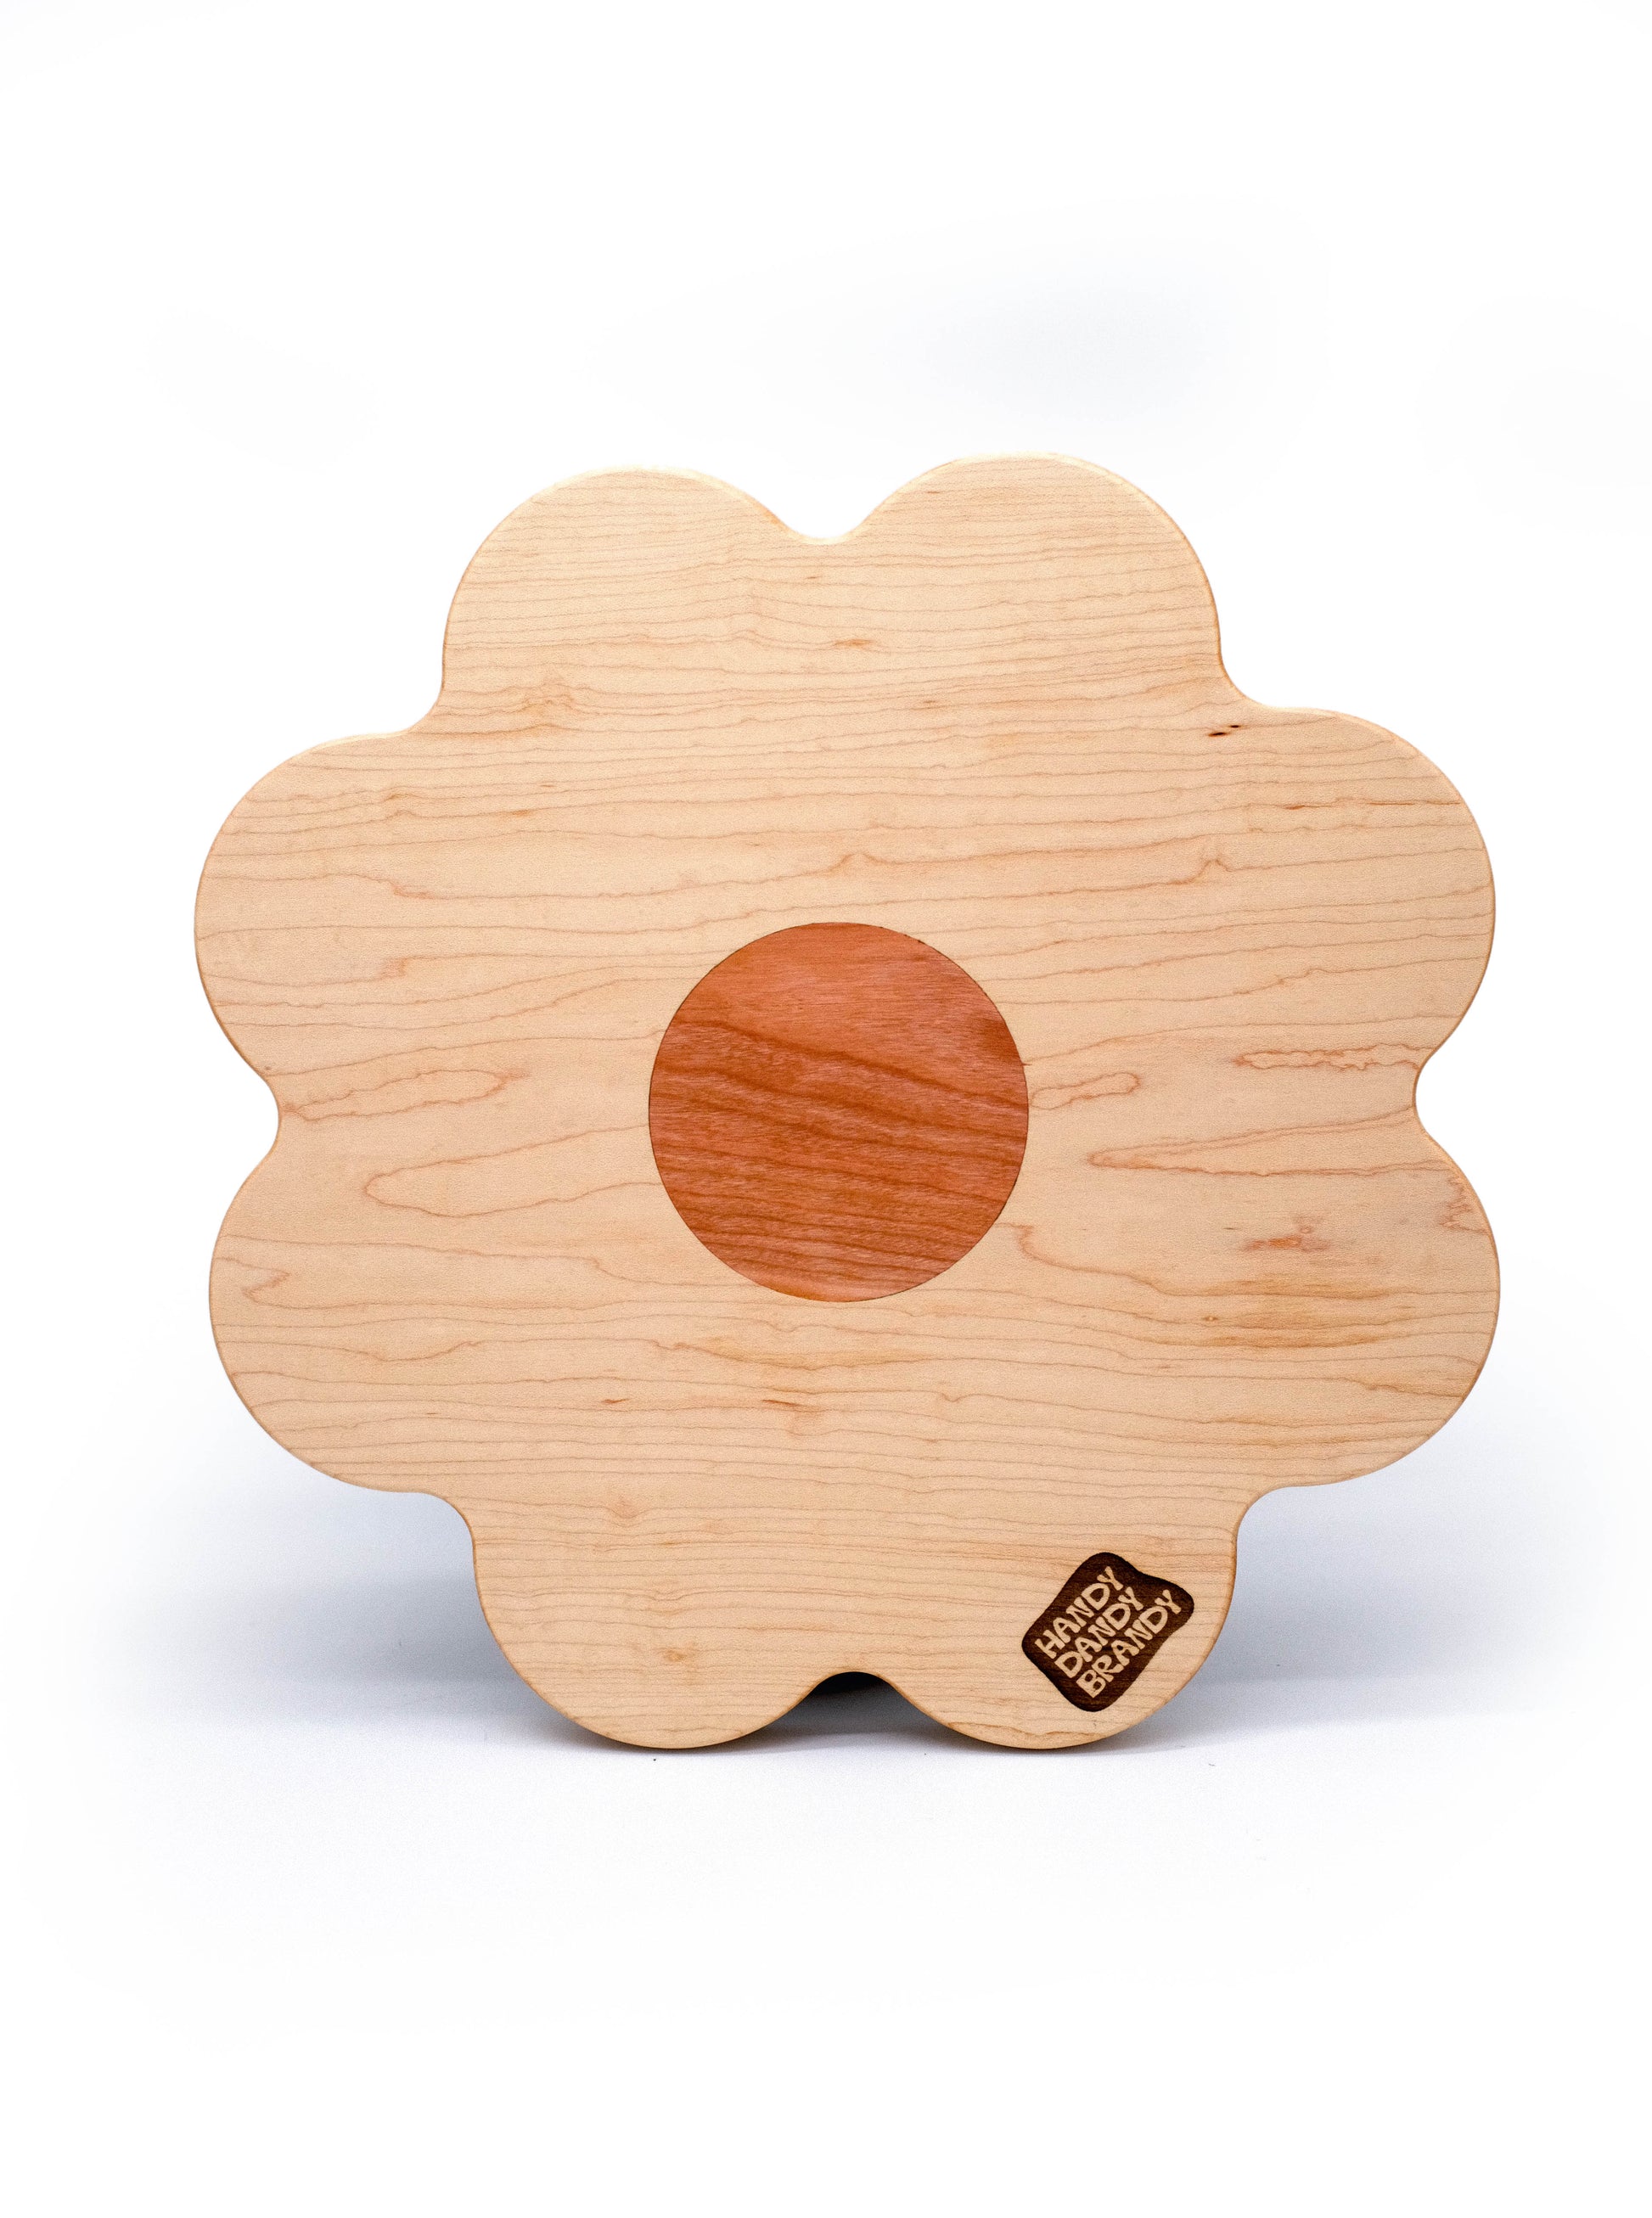 flower cutting board made of maple and cherry